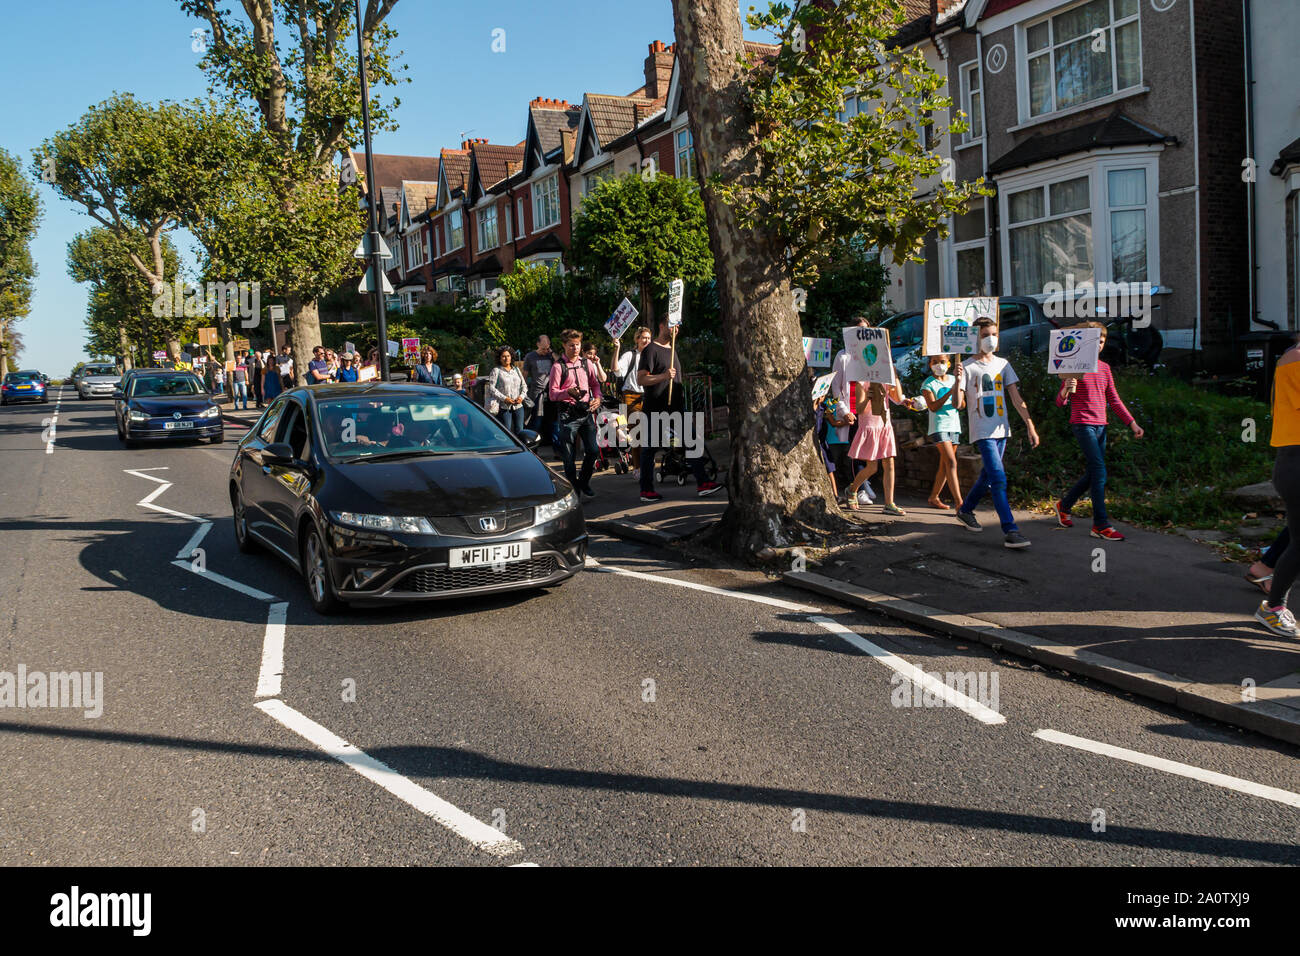 London, UK. 21st September 2019. Families and children march alongside the South Circular Road to a rally in Catford. Clean Air for Catford demand Lewisham Council take bolder and faster action to reduce air pollution, particularly around schools. Continual heavy traffic along the South Circular is largely responsible. Across London two million people, including 400,000 children live in areas with illegal levels of pollution, causing almost 10,000 deaths a year in the city. Peter Marshall/Alamy Live News Stock Photo